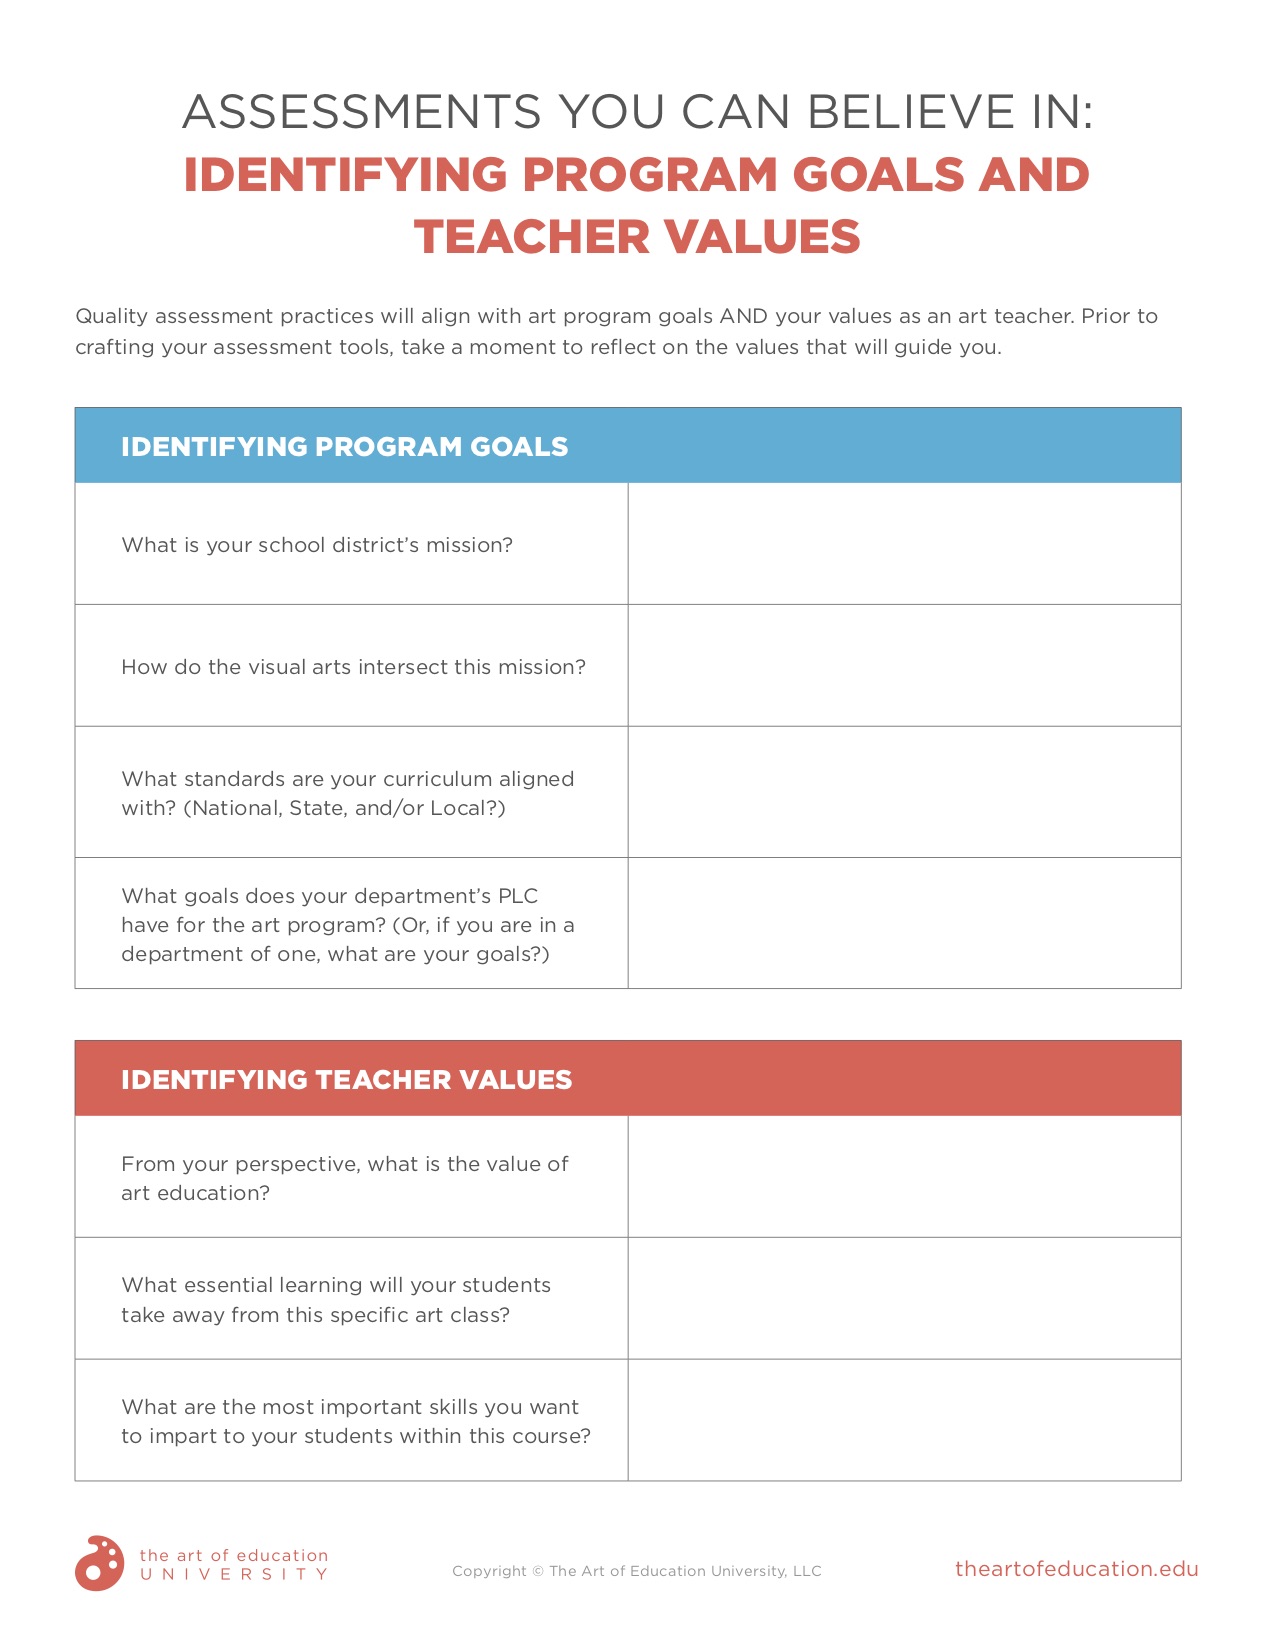 https://uploads.theartofeducation.edu/2022/02/94.1_Assessments-You-Can-Believe-In-Identifying-Program-Goals-and-Teacher-Values.pdf